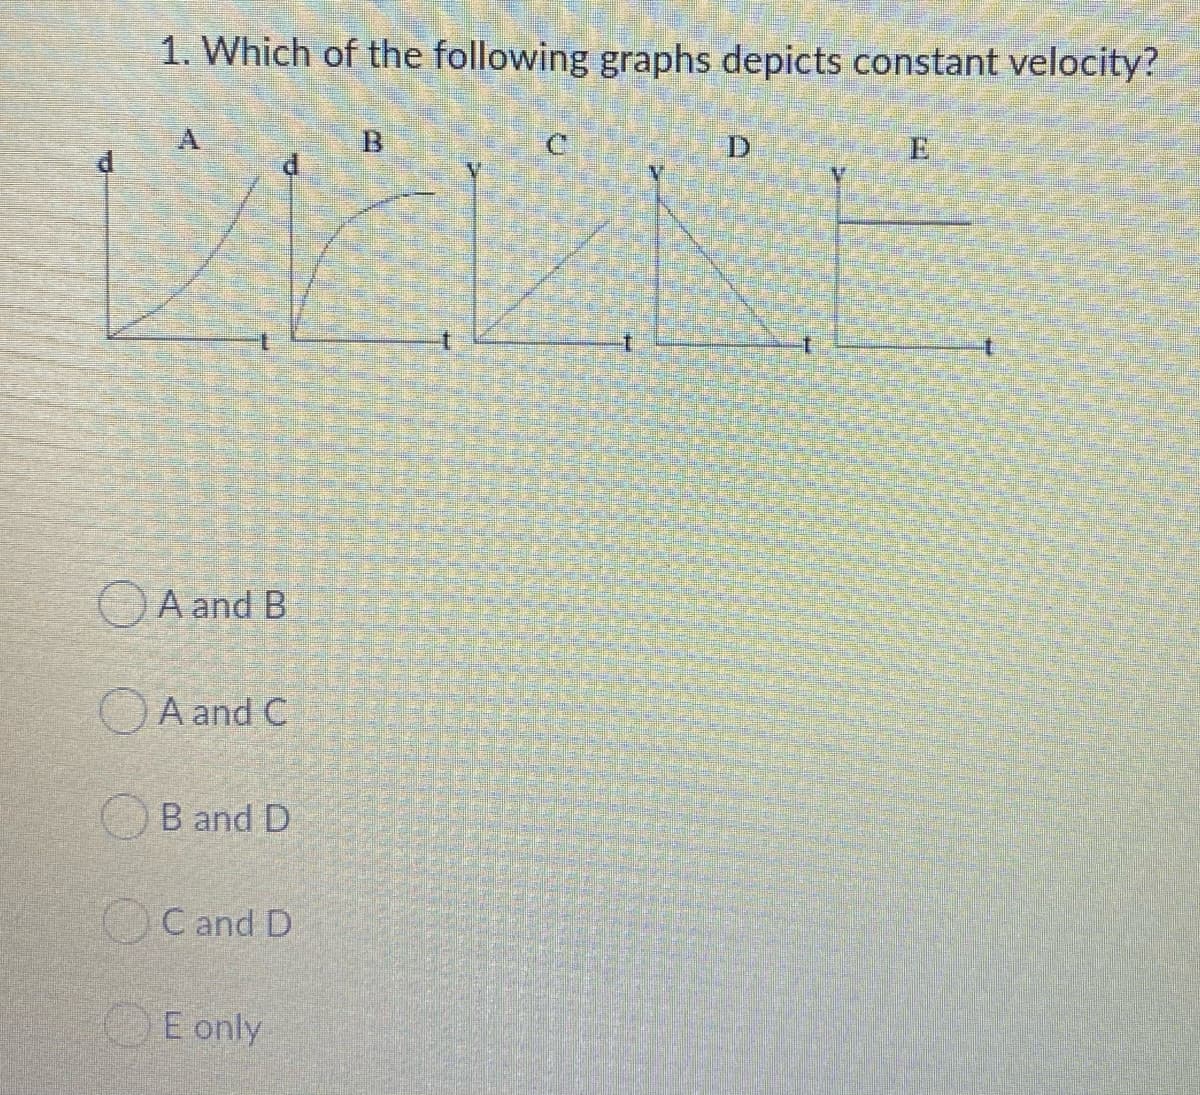 1. Which of the following graphs depicts constant velocity?
B.
OA and B
A and C
B and D
OC and D
E only
